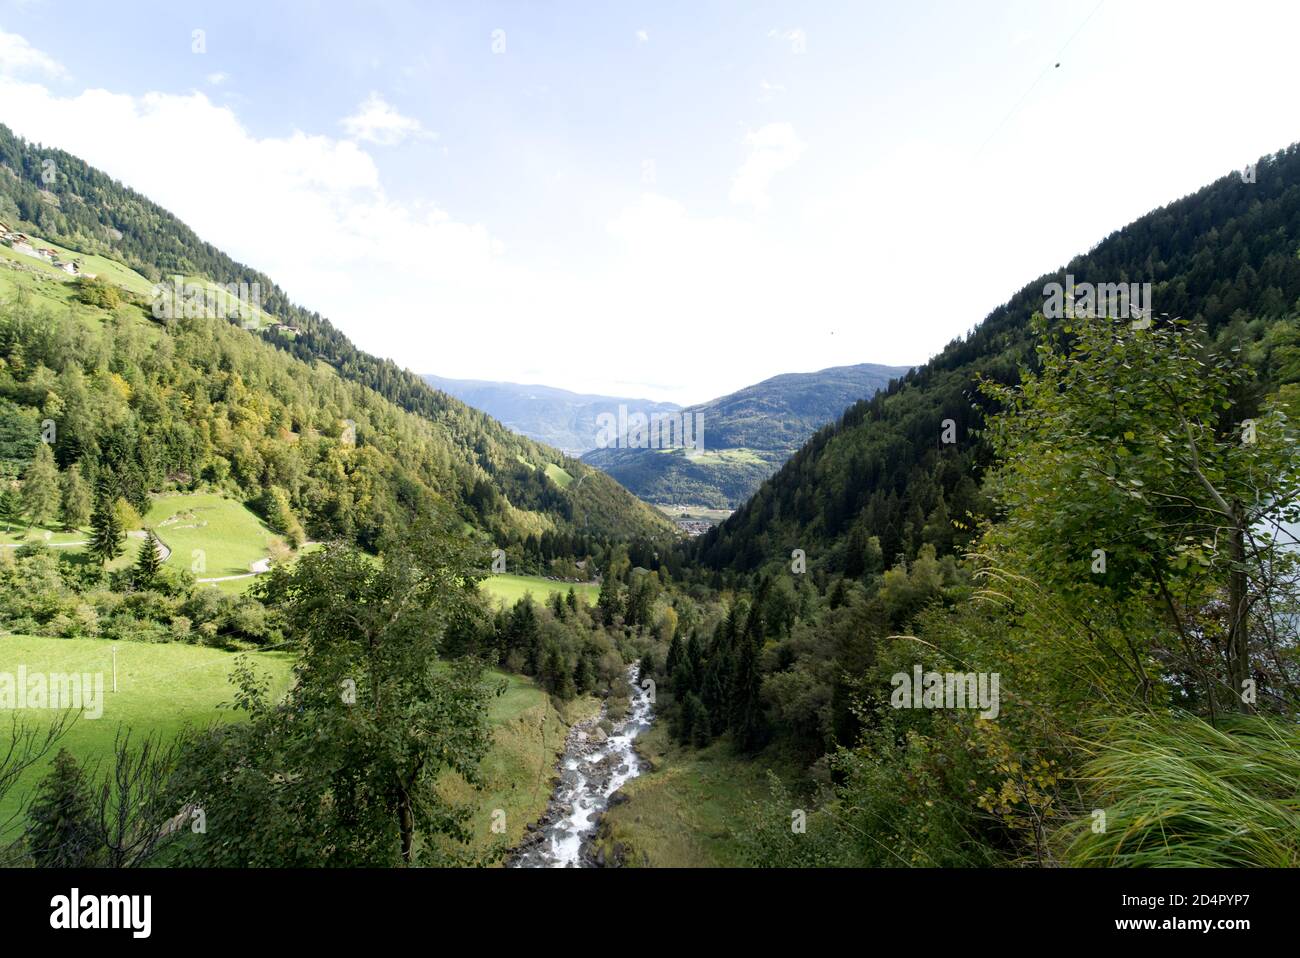 Scenic image of the stream from the waterfall near Partschins, South Tirol, Italy. Stock Photo